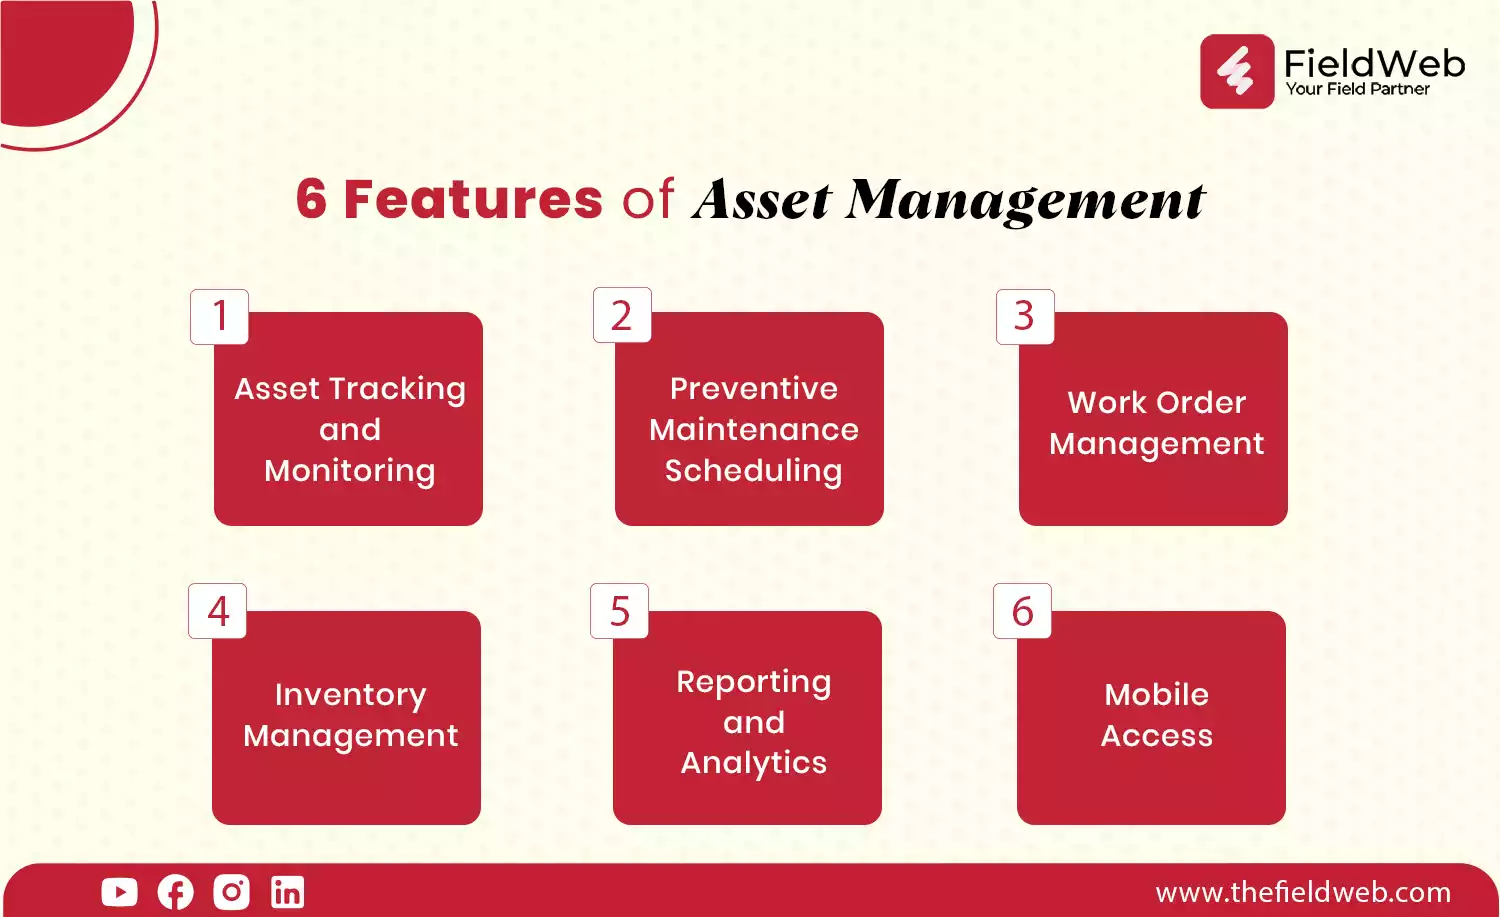 image is displaying 6 asset management software features